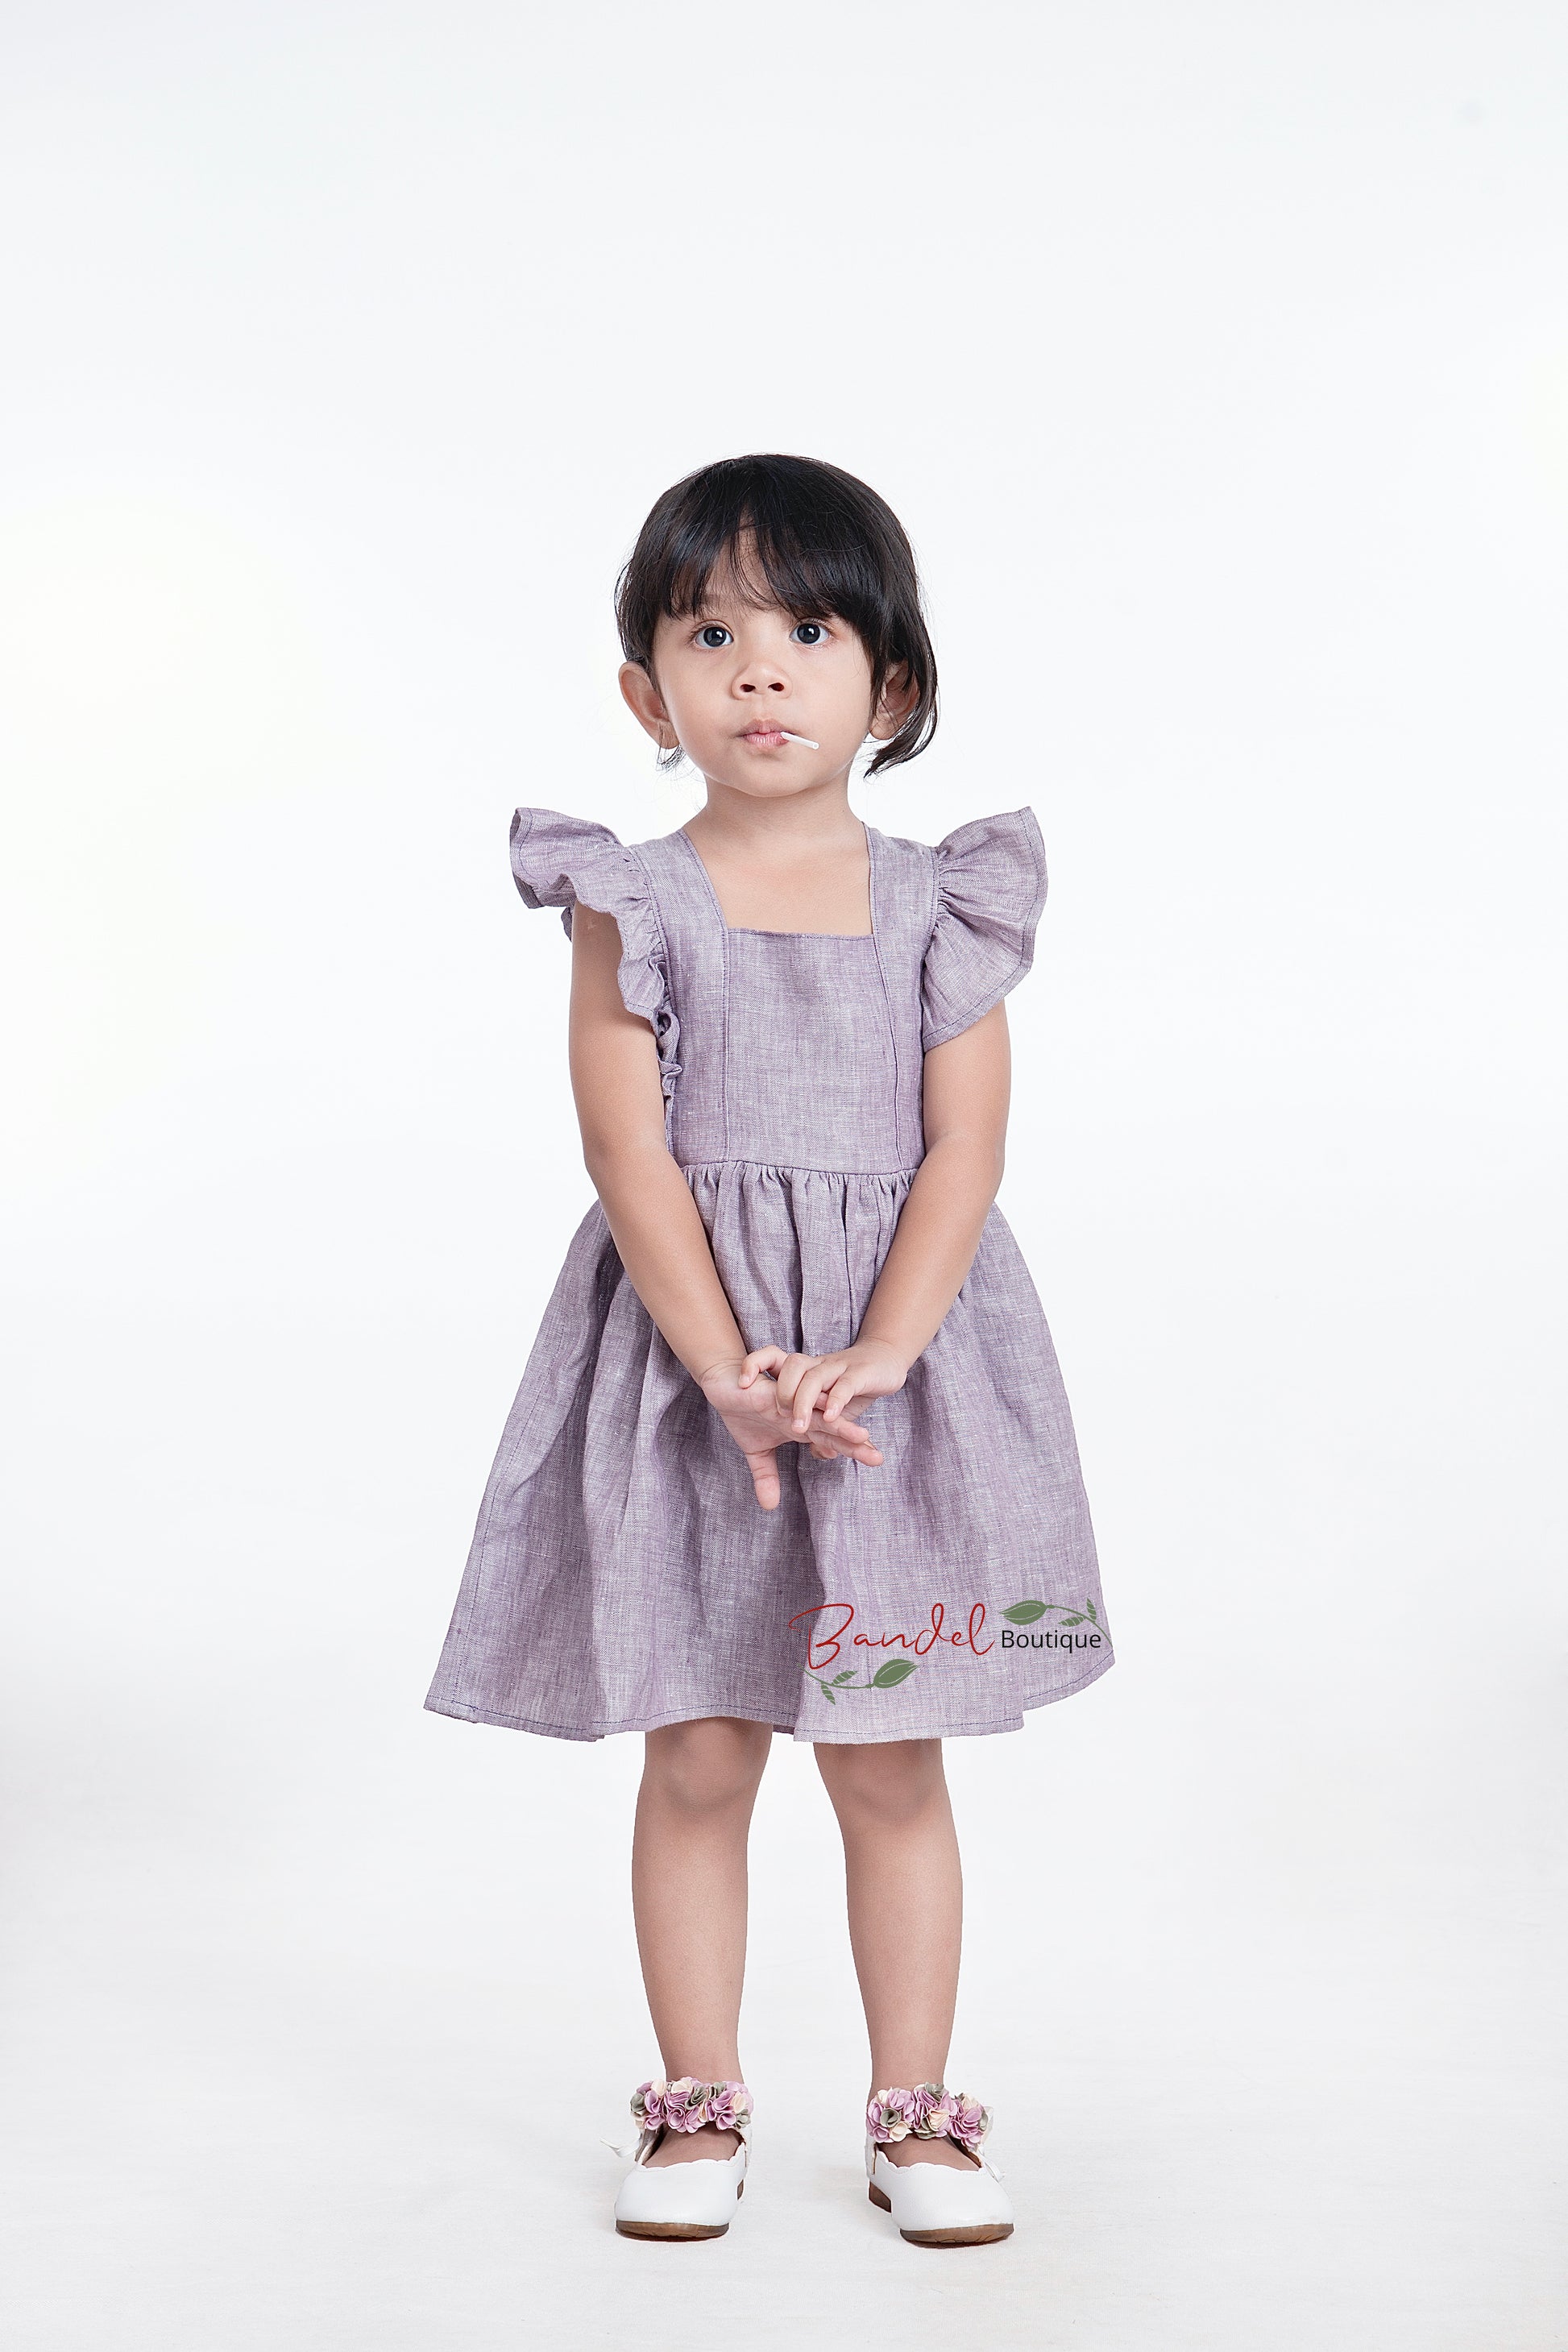 Timeless charm with our exquisite mauve linen dress for girls. Crafted from high-quality linen fabric in The Netherlands. This vintage-inspired dress features sleeve ruffles, adjustable straps, and a gathered skirt. The lightweight and breathable fabric ensure both comfort and sophistication. Perfect for weddings, birthdays, or family gatherings, this dress adds a touch of elegance to any special occasion. Available in various sizes. Create lasting memories in style with our mauve linen dress!